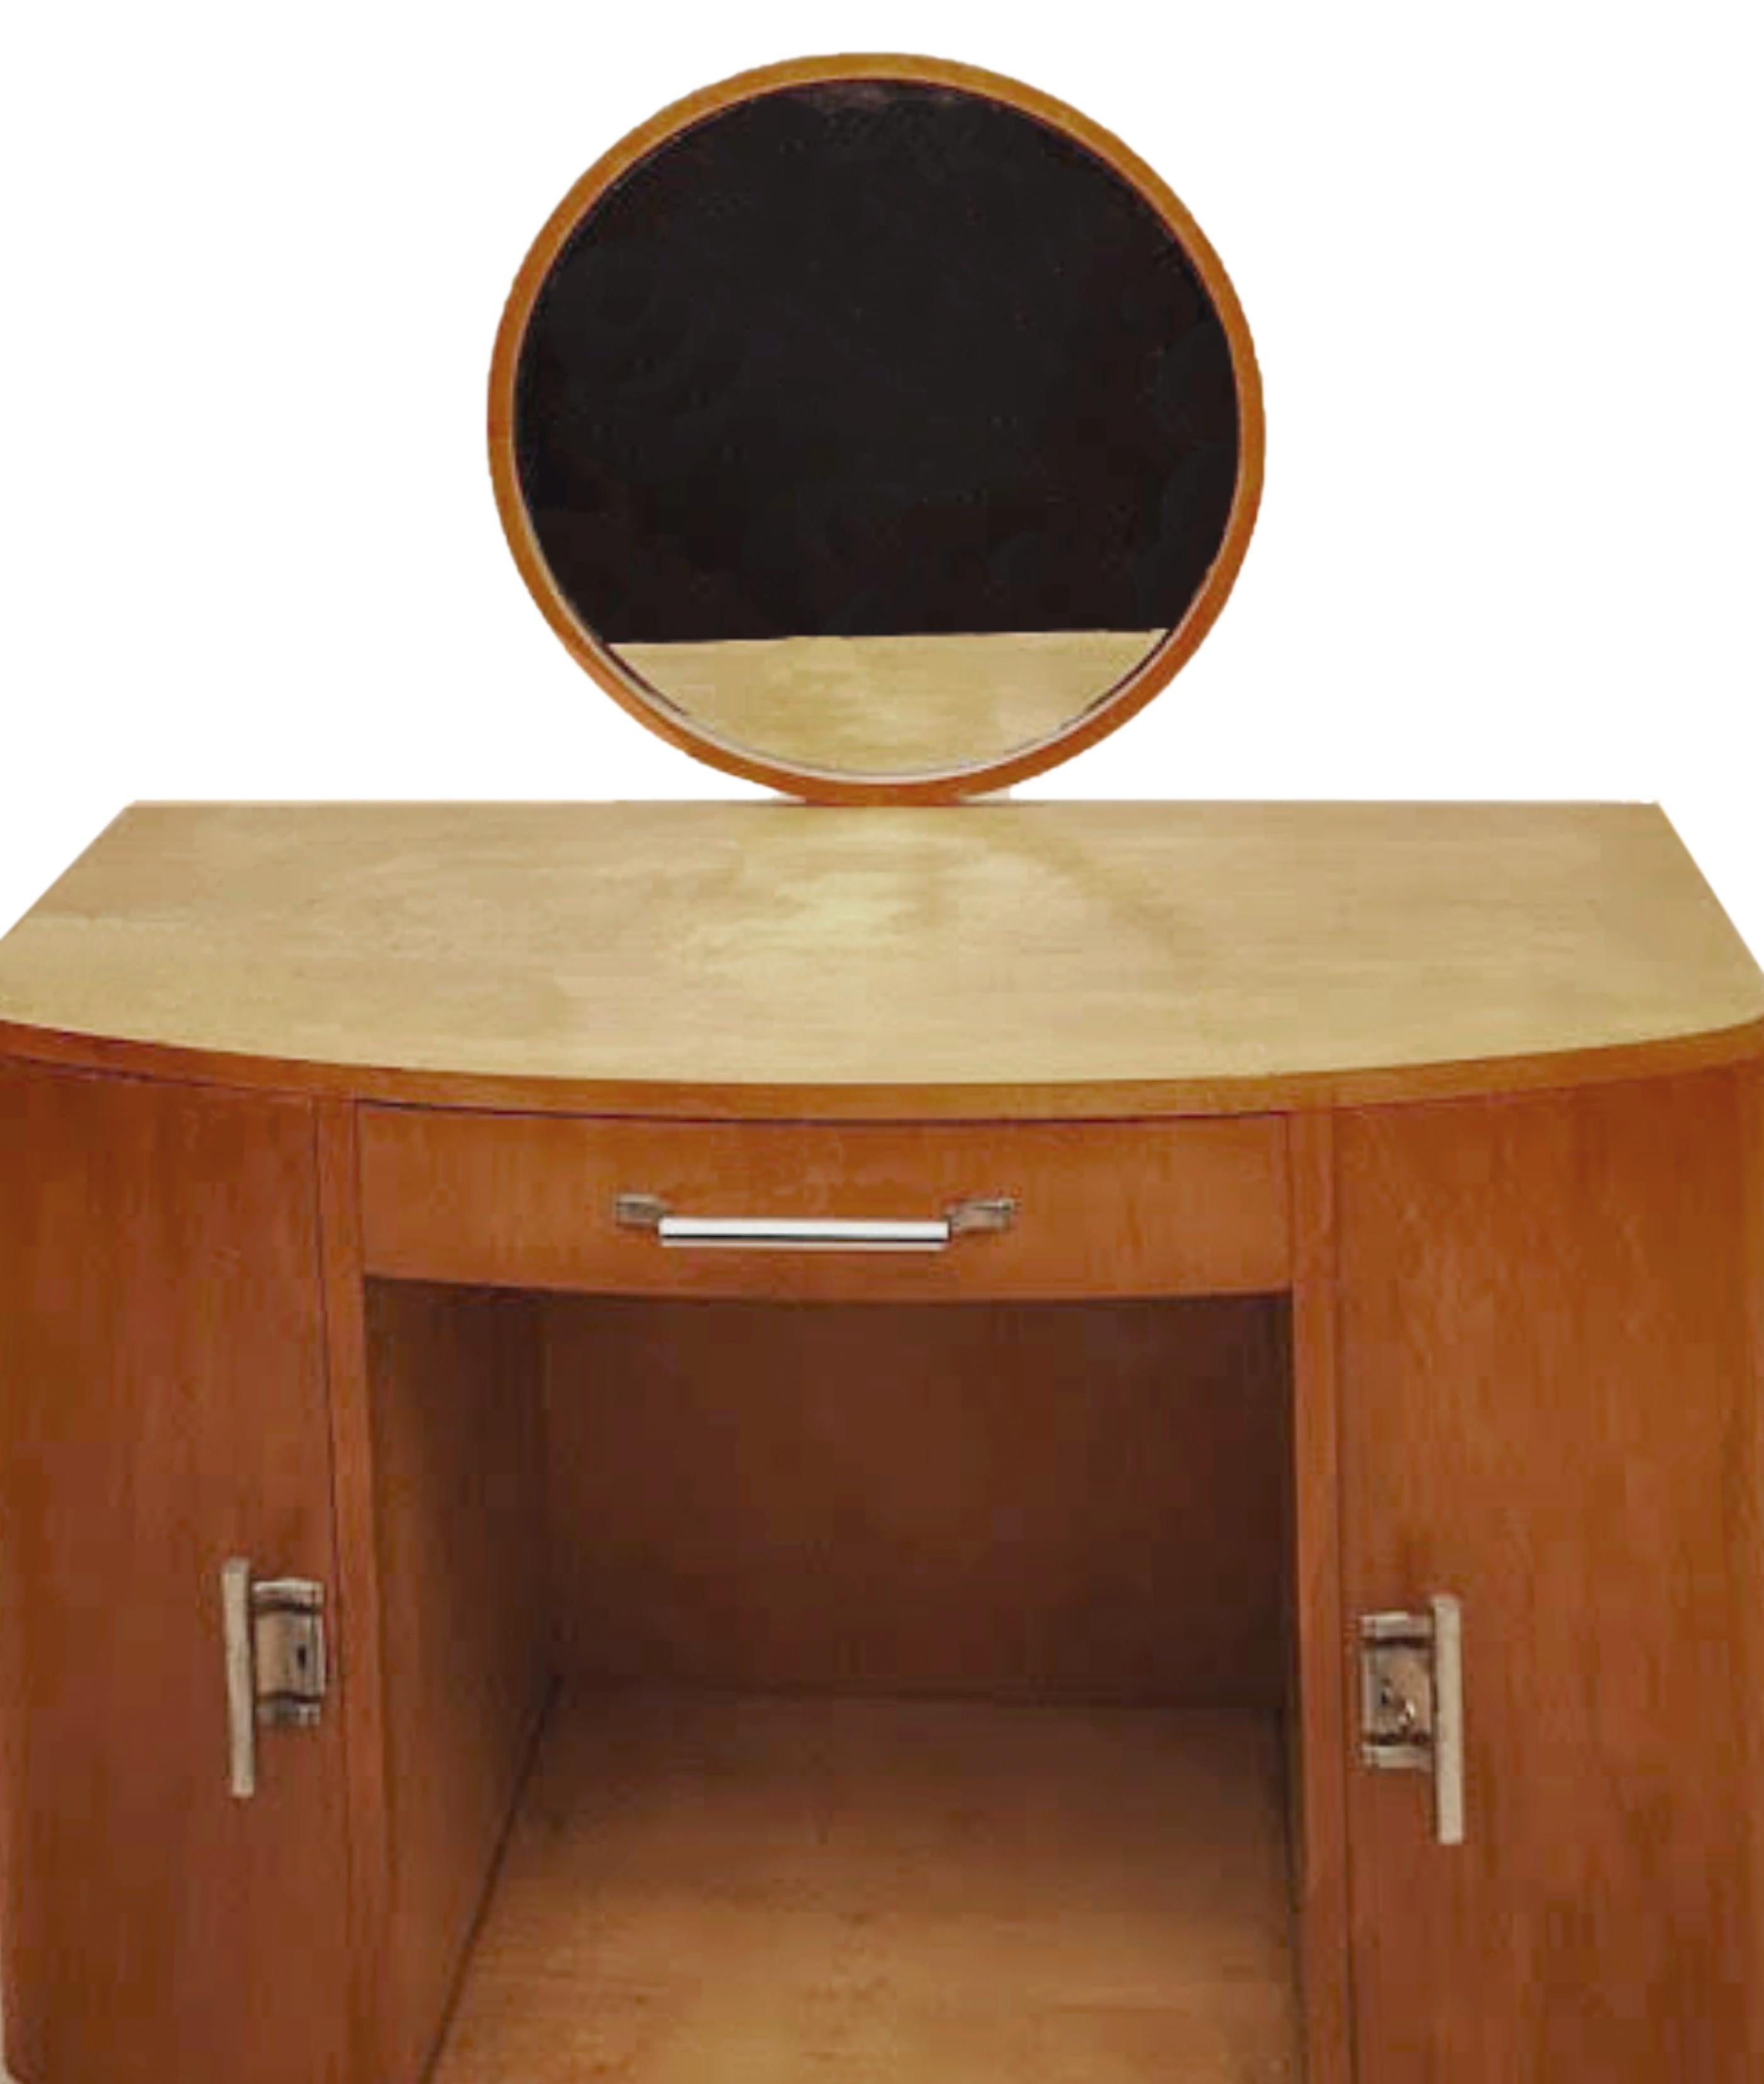 A spruce wood vanity dressing table with removable round mirror and blue satin bench.
Order, color, geometry, words that define the Art Deco world. 
In Portugal, examples like this one were created for refurbishing the new Art Deco apartments of the